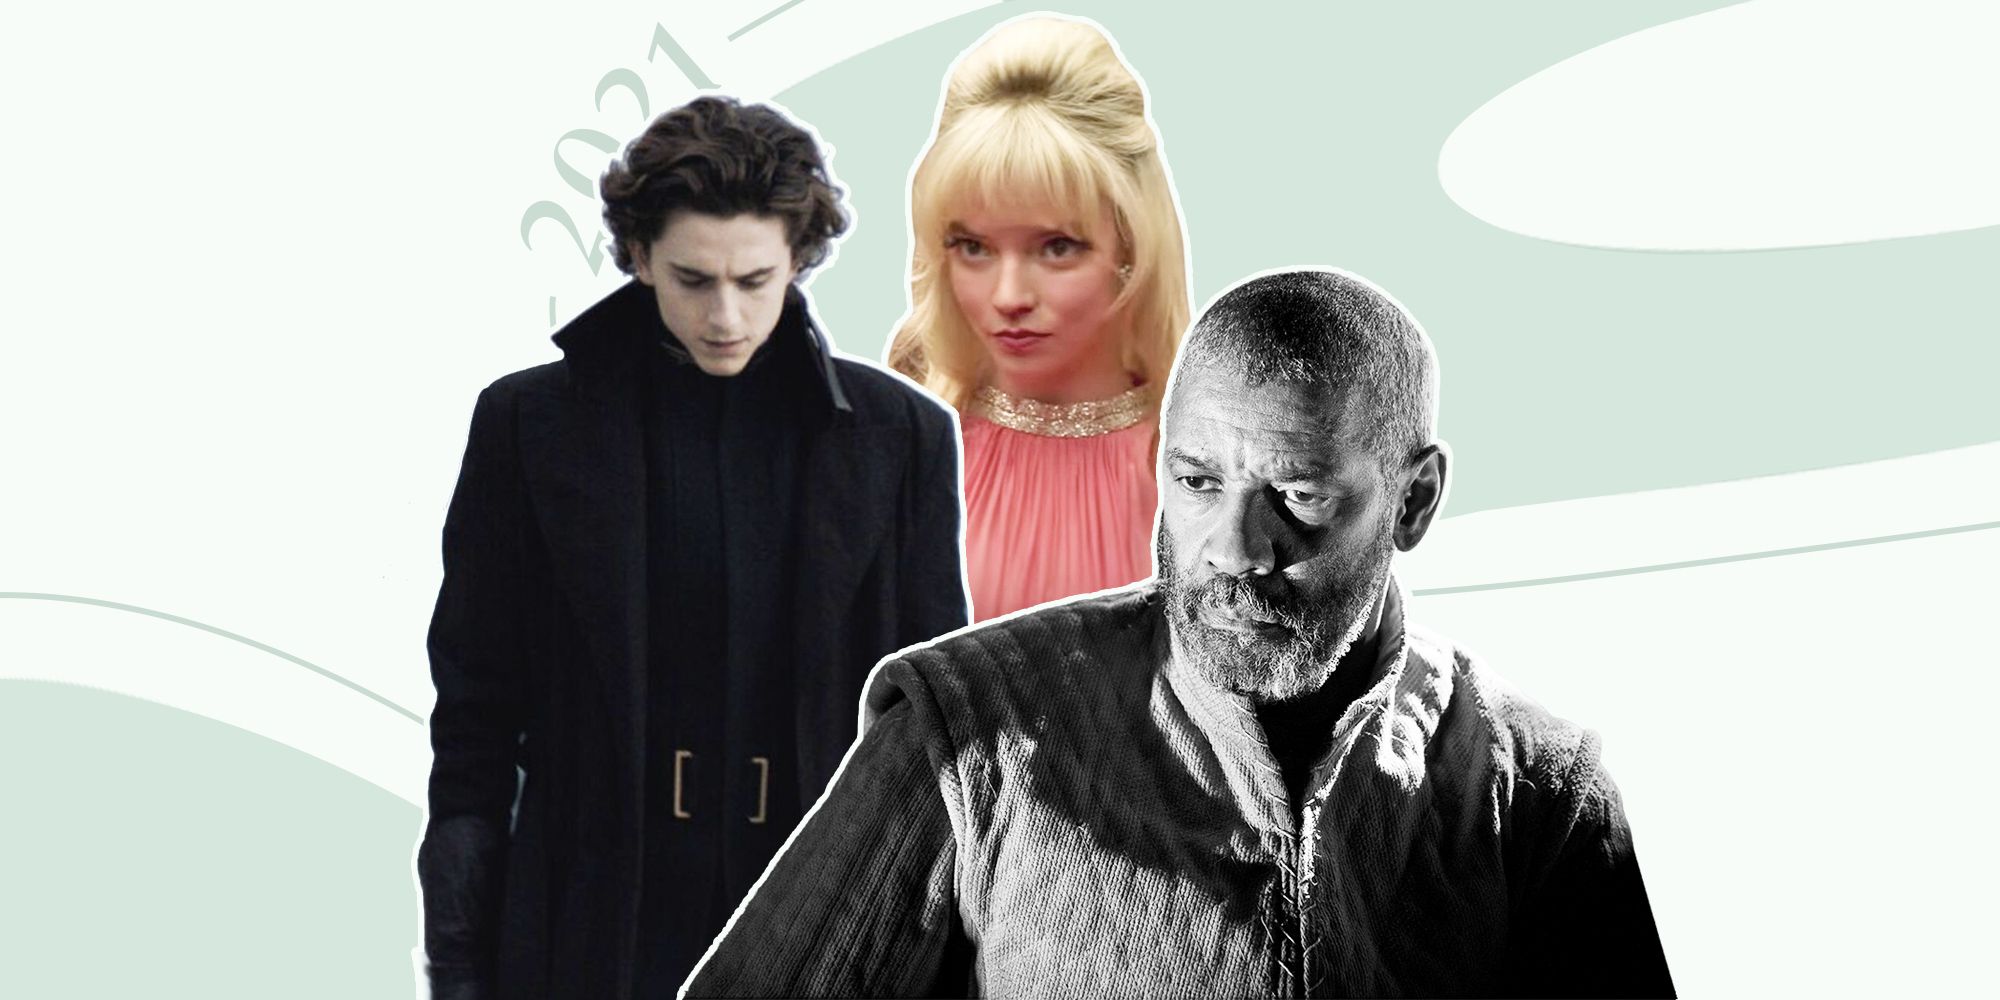 65 Best Movies of 2021 - Top New 2021 Films to Stream Now